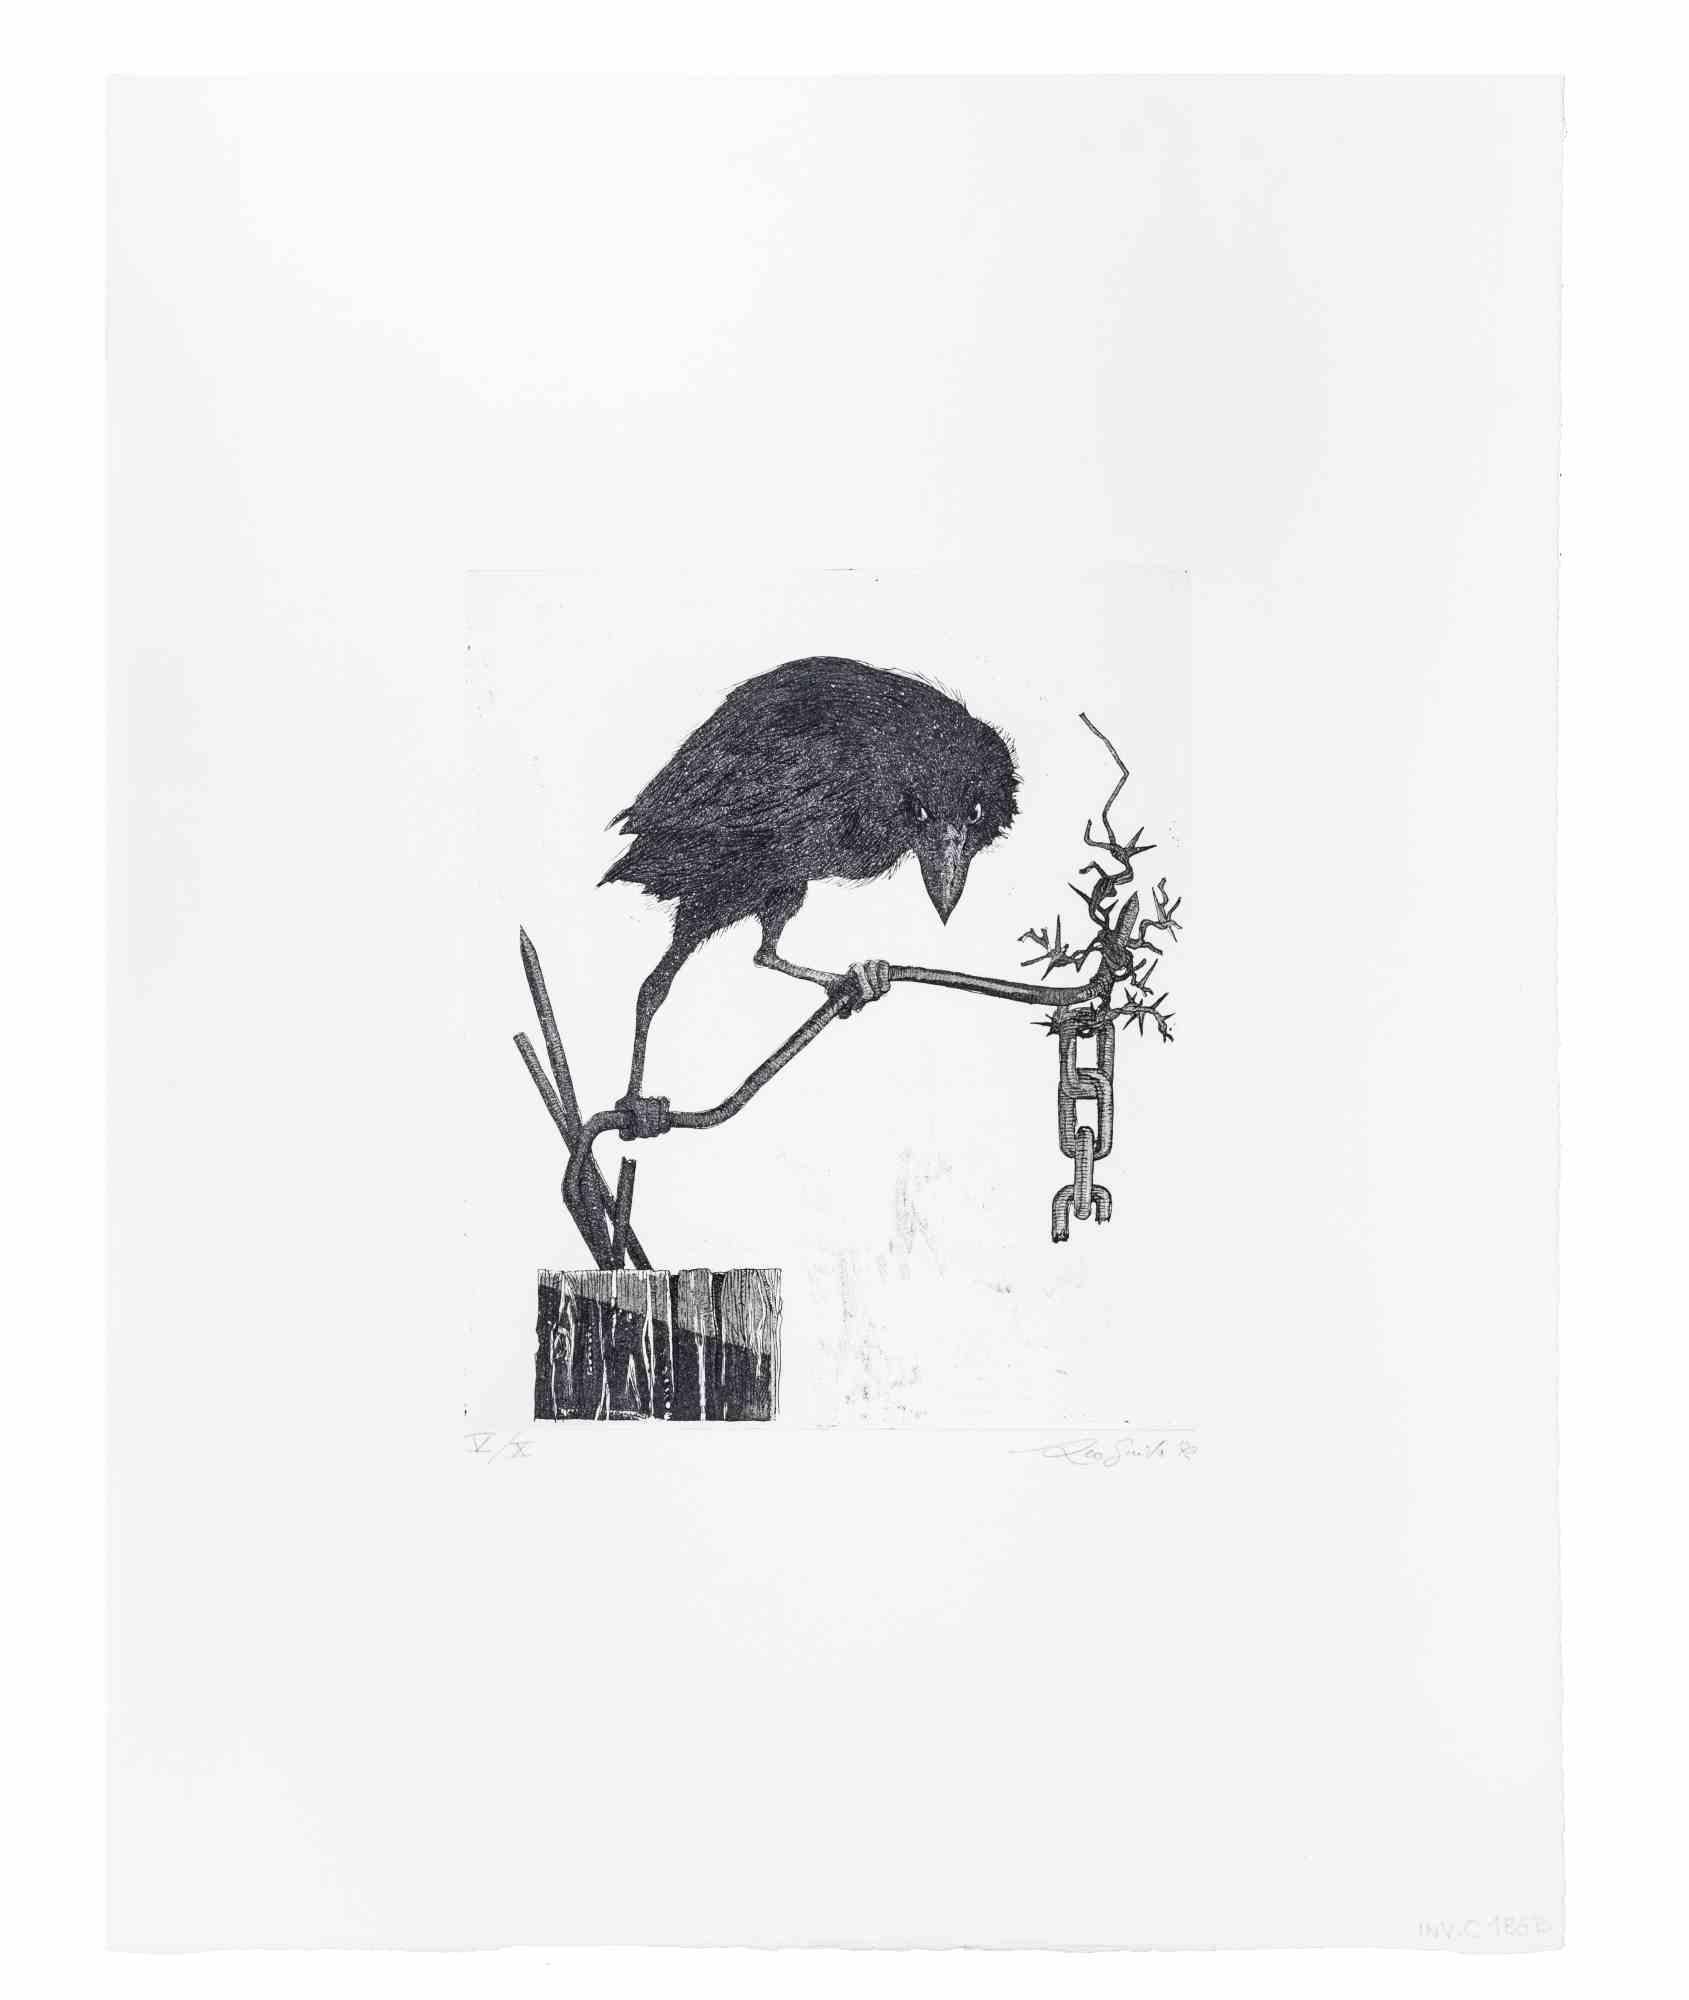 Crow on the Branch is an artwork realized in 1972 by the Italian Contemporary artist  Leo Guida  (1992 - 2017).

Original etching on cardboard. 

Hand Signed and dated on the lower right margin and numbered, edition V/X, on the left corner. 

Good